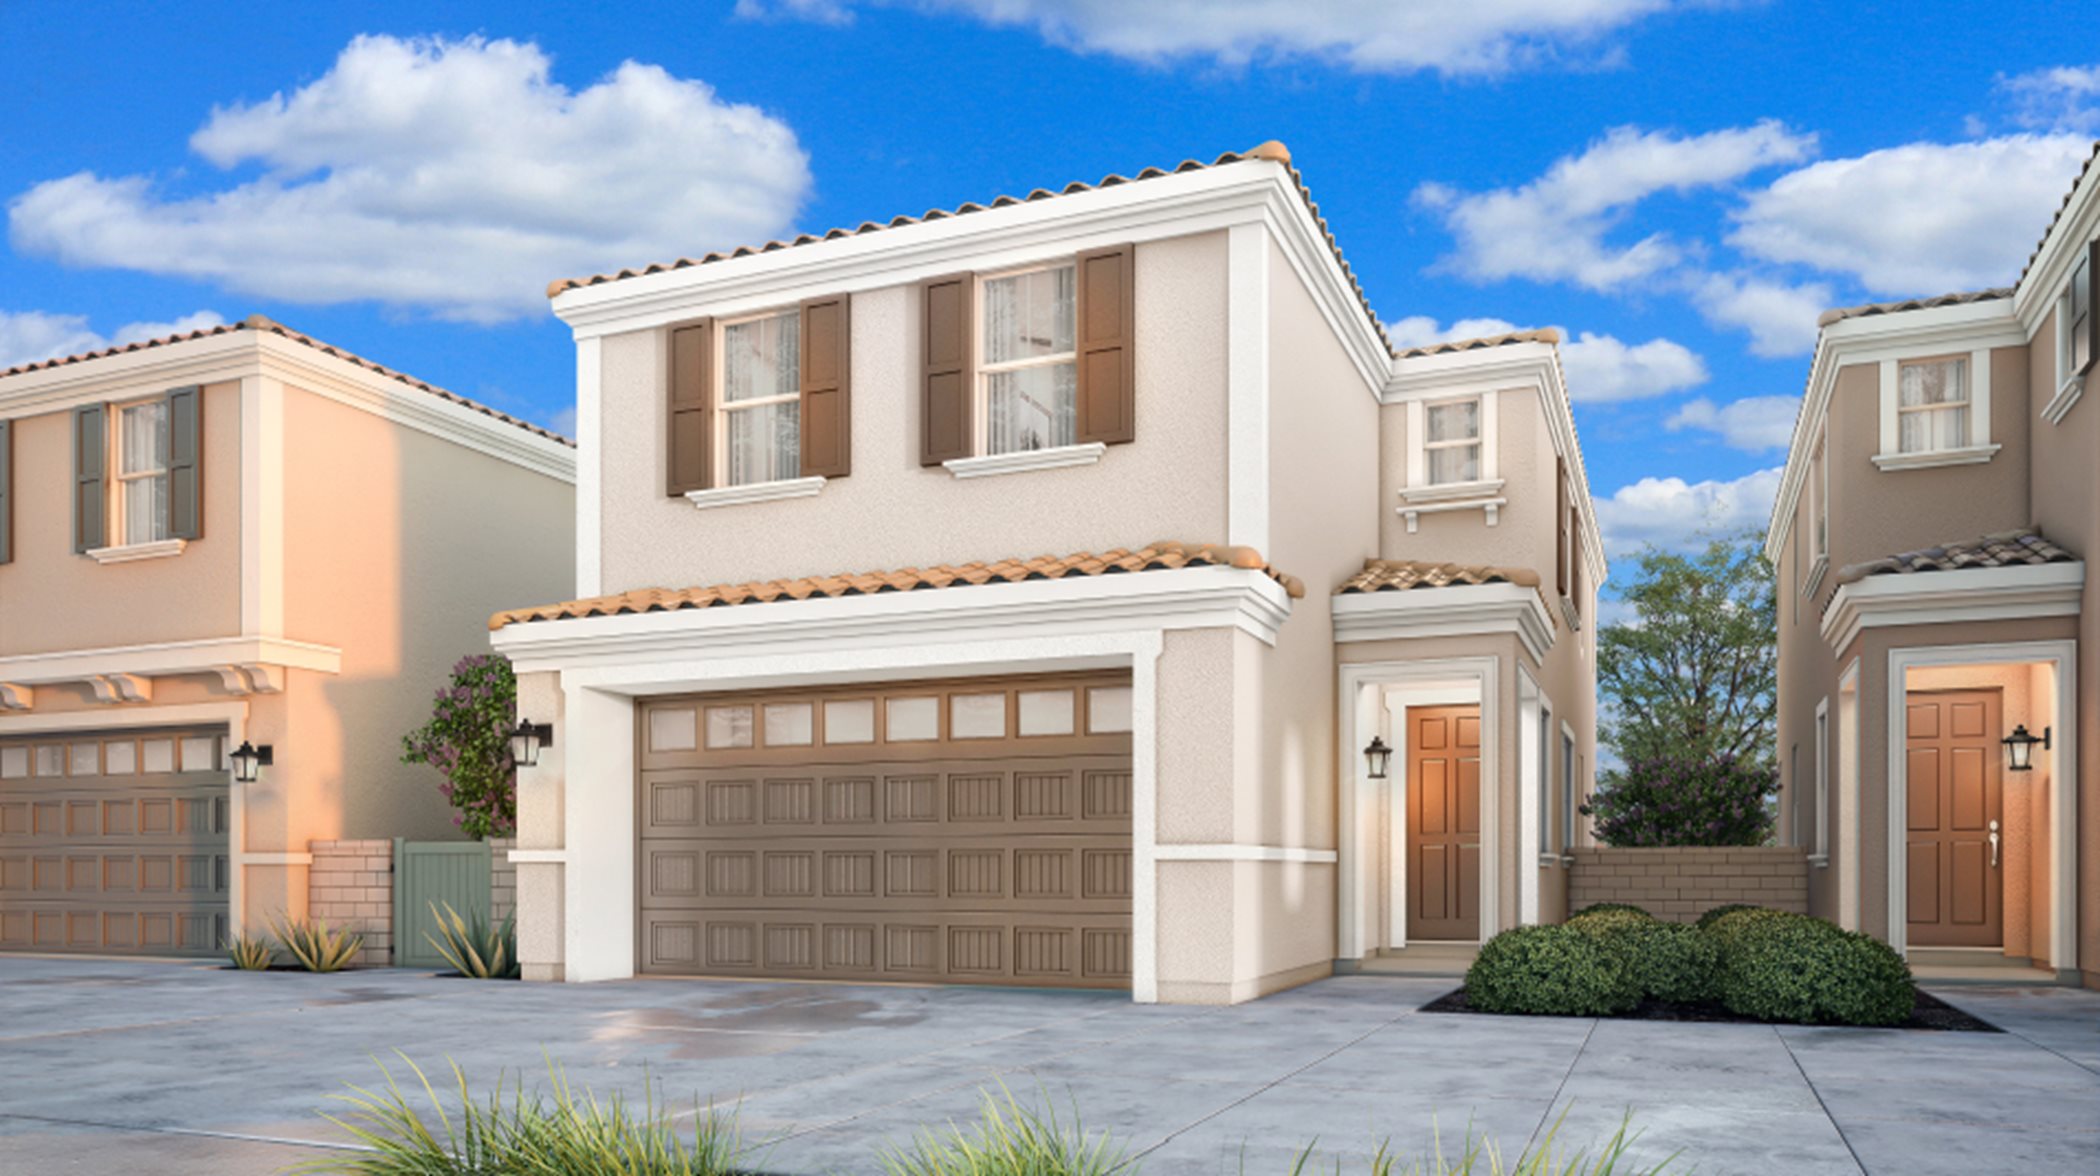 Italianate-style home exterior rendering